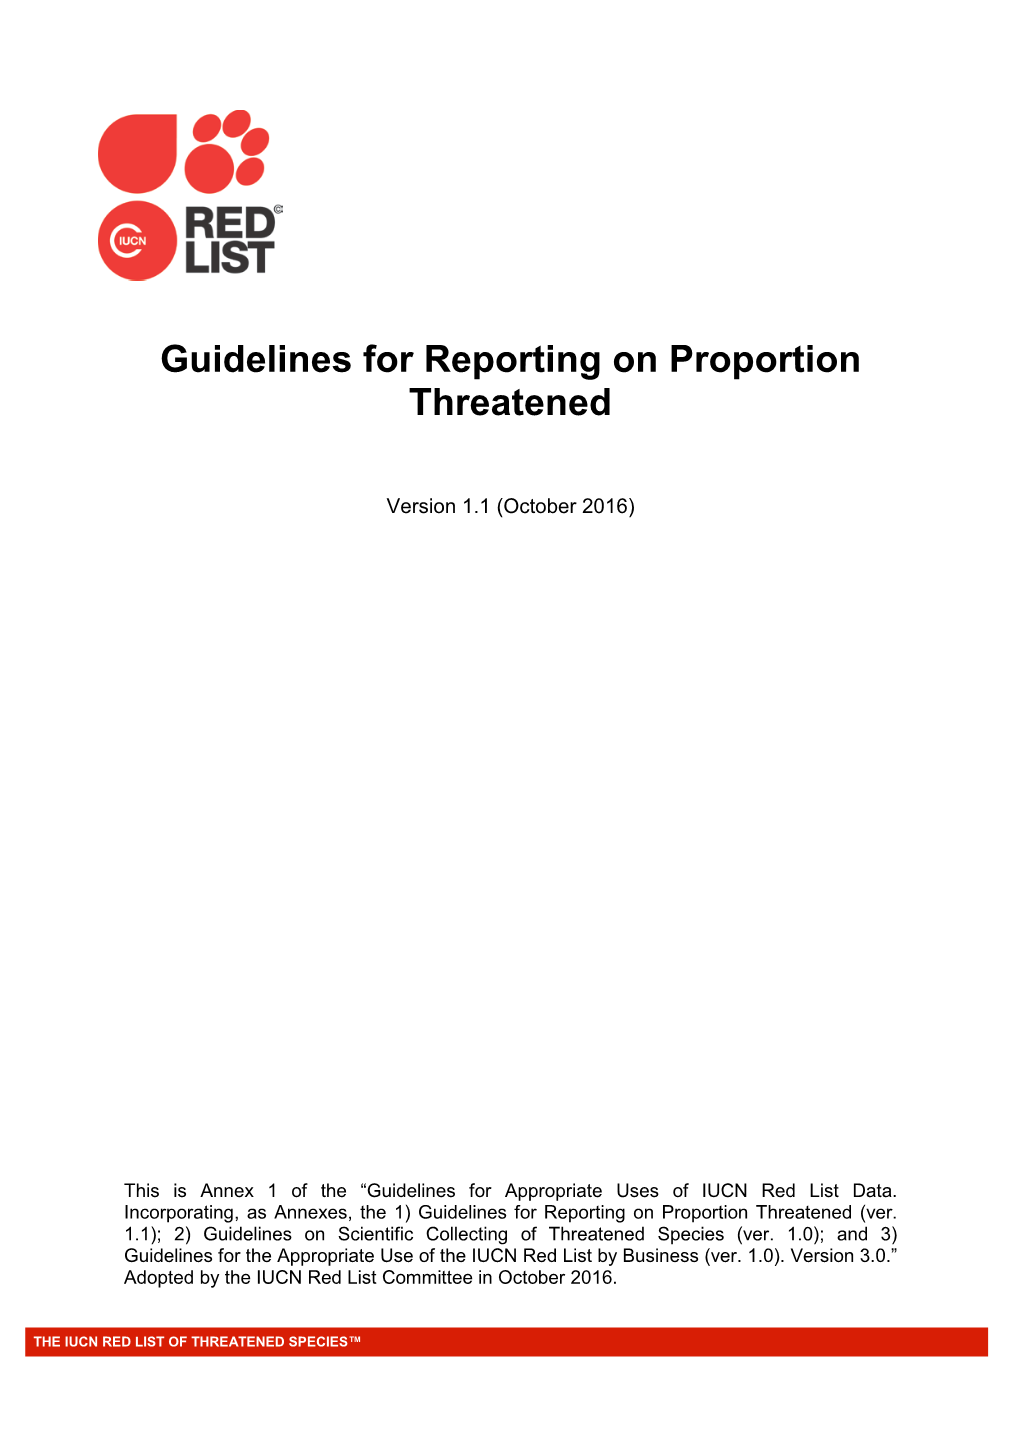 Guidelines for Reporting on Proportion Threatened